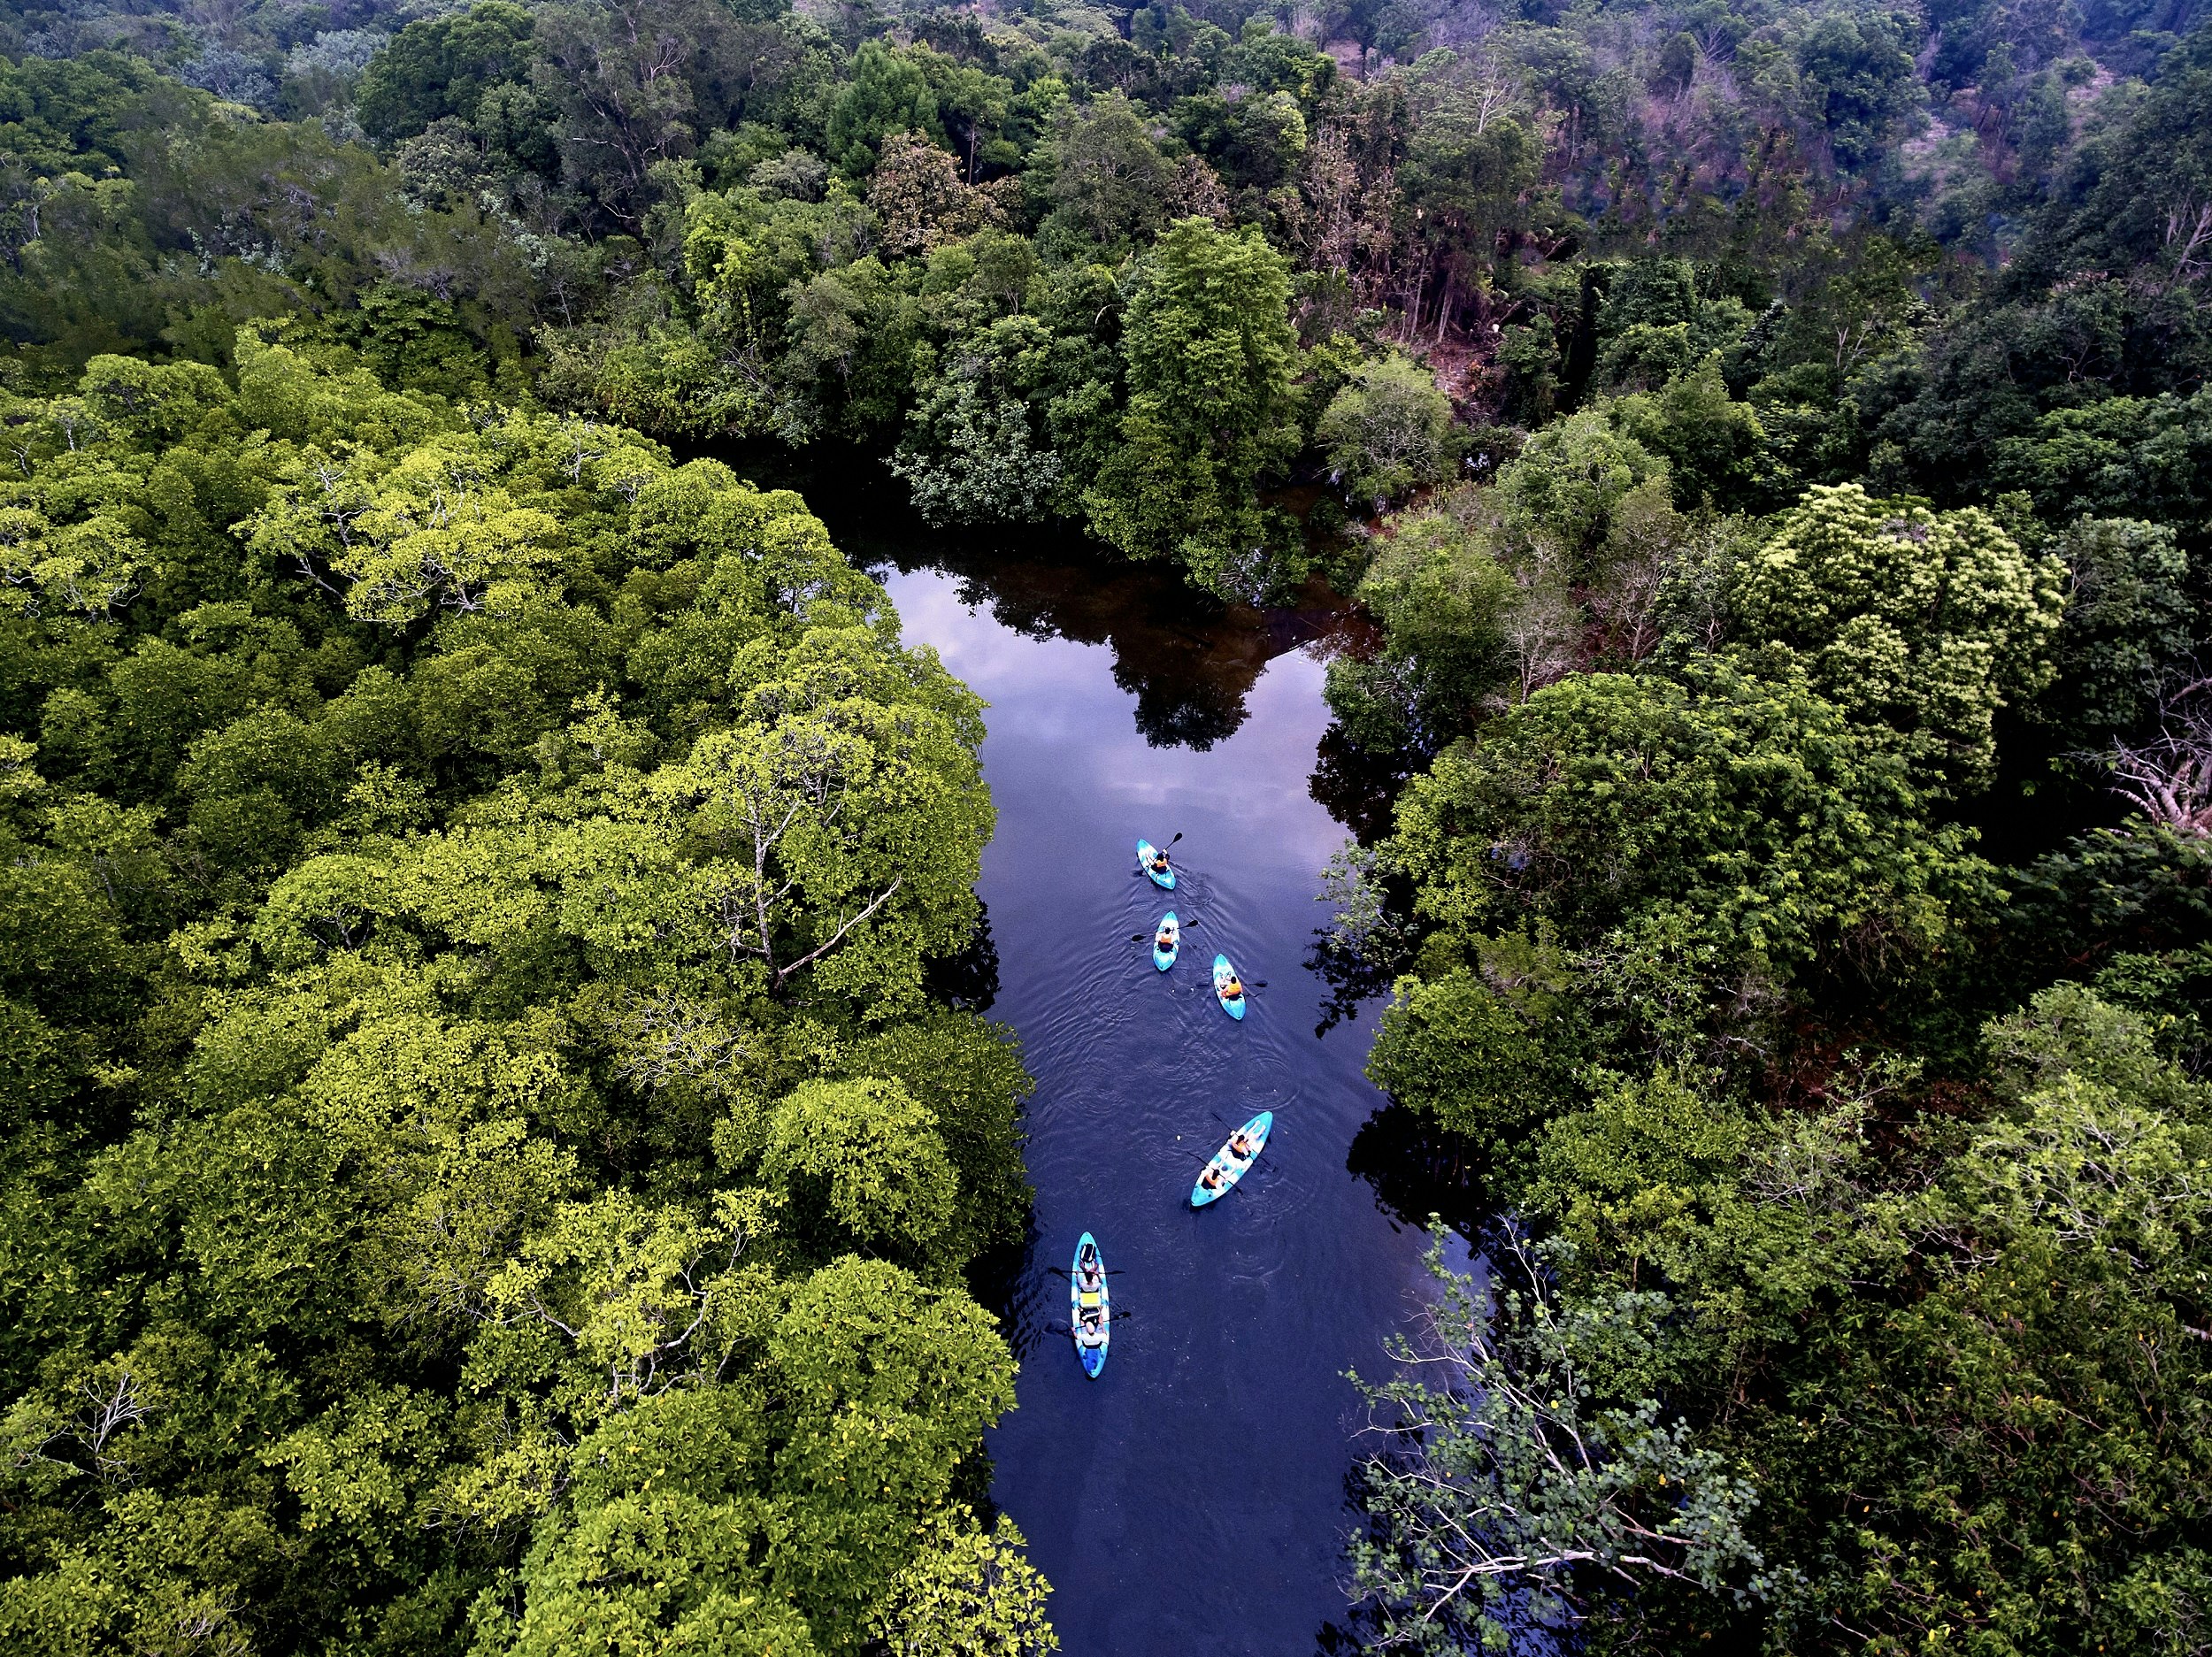 As viewed from high above (likely taken by a drone), this image looks down on five blue kayaks exploring a narrow stretch of waterway between lush forests.